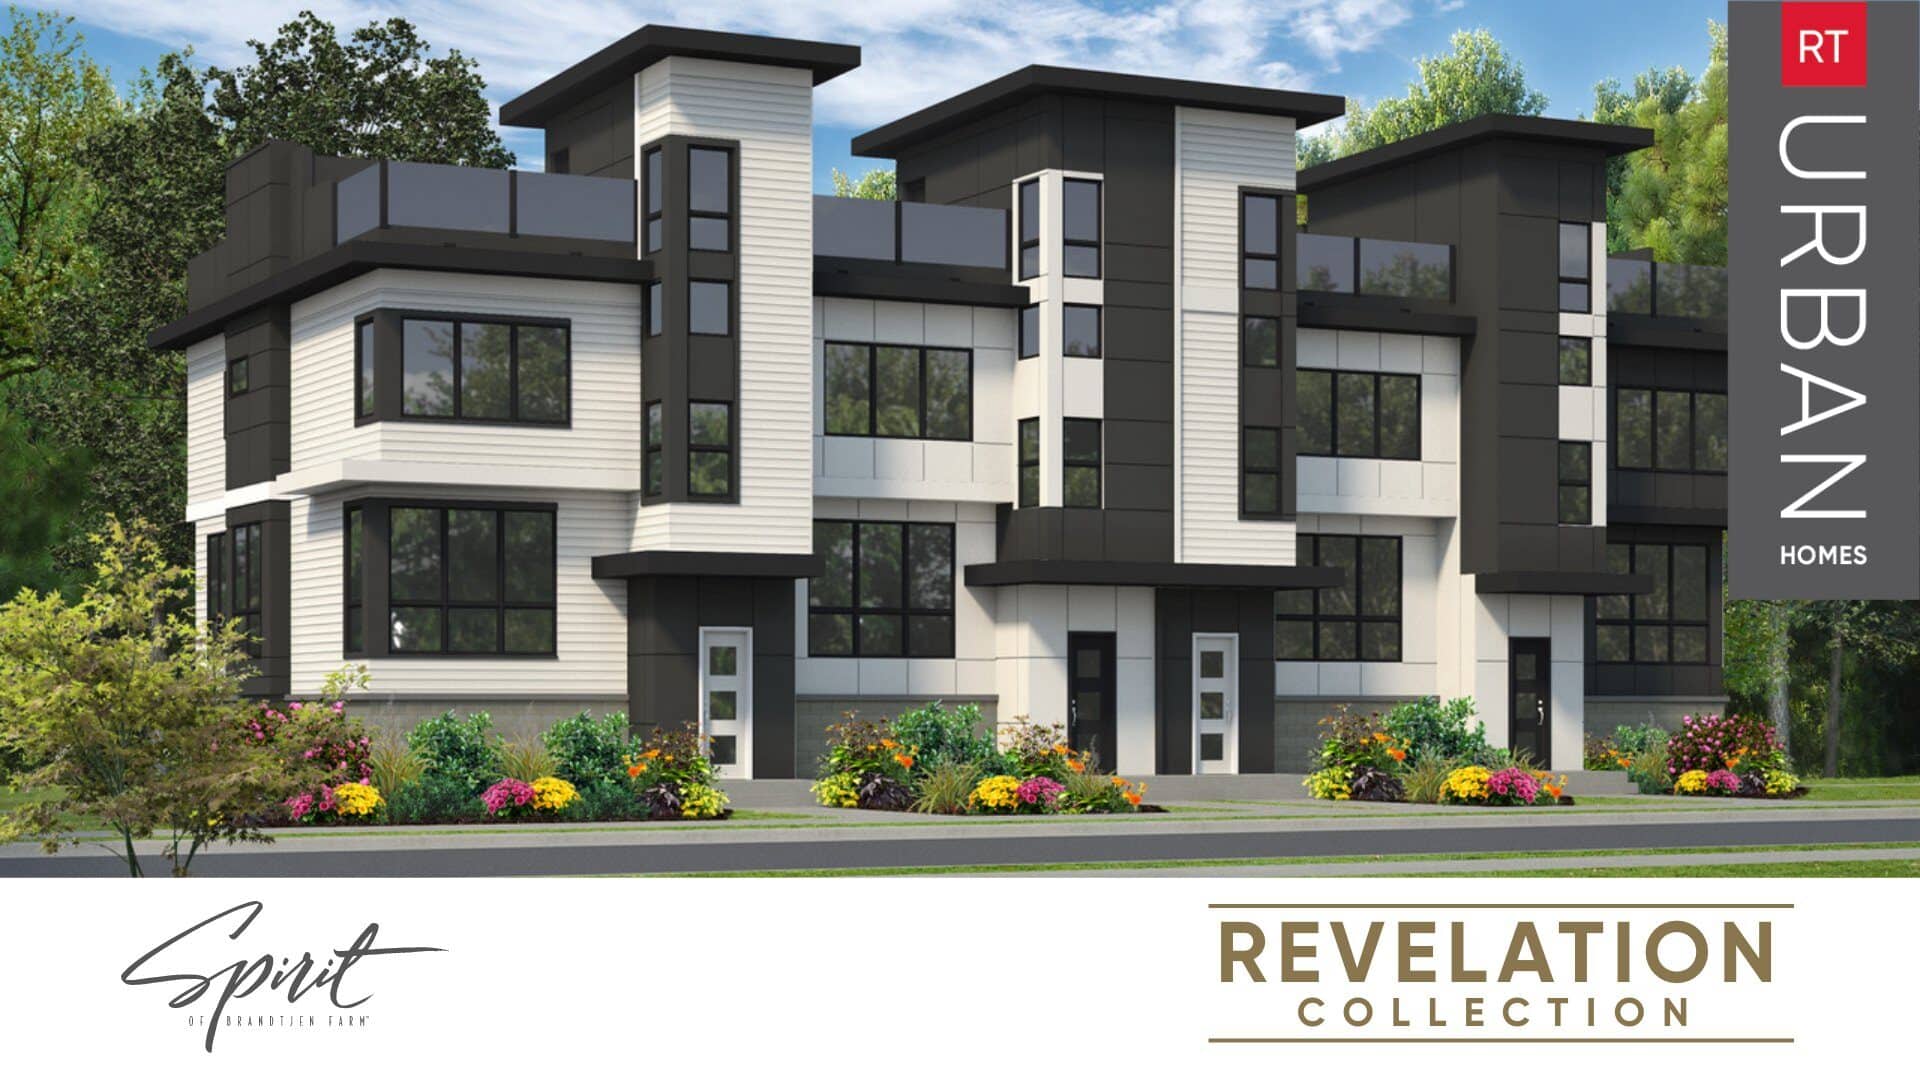 Introducing the Revelation Collection attached townhomes from RT Urban Homes